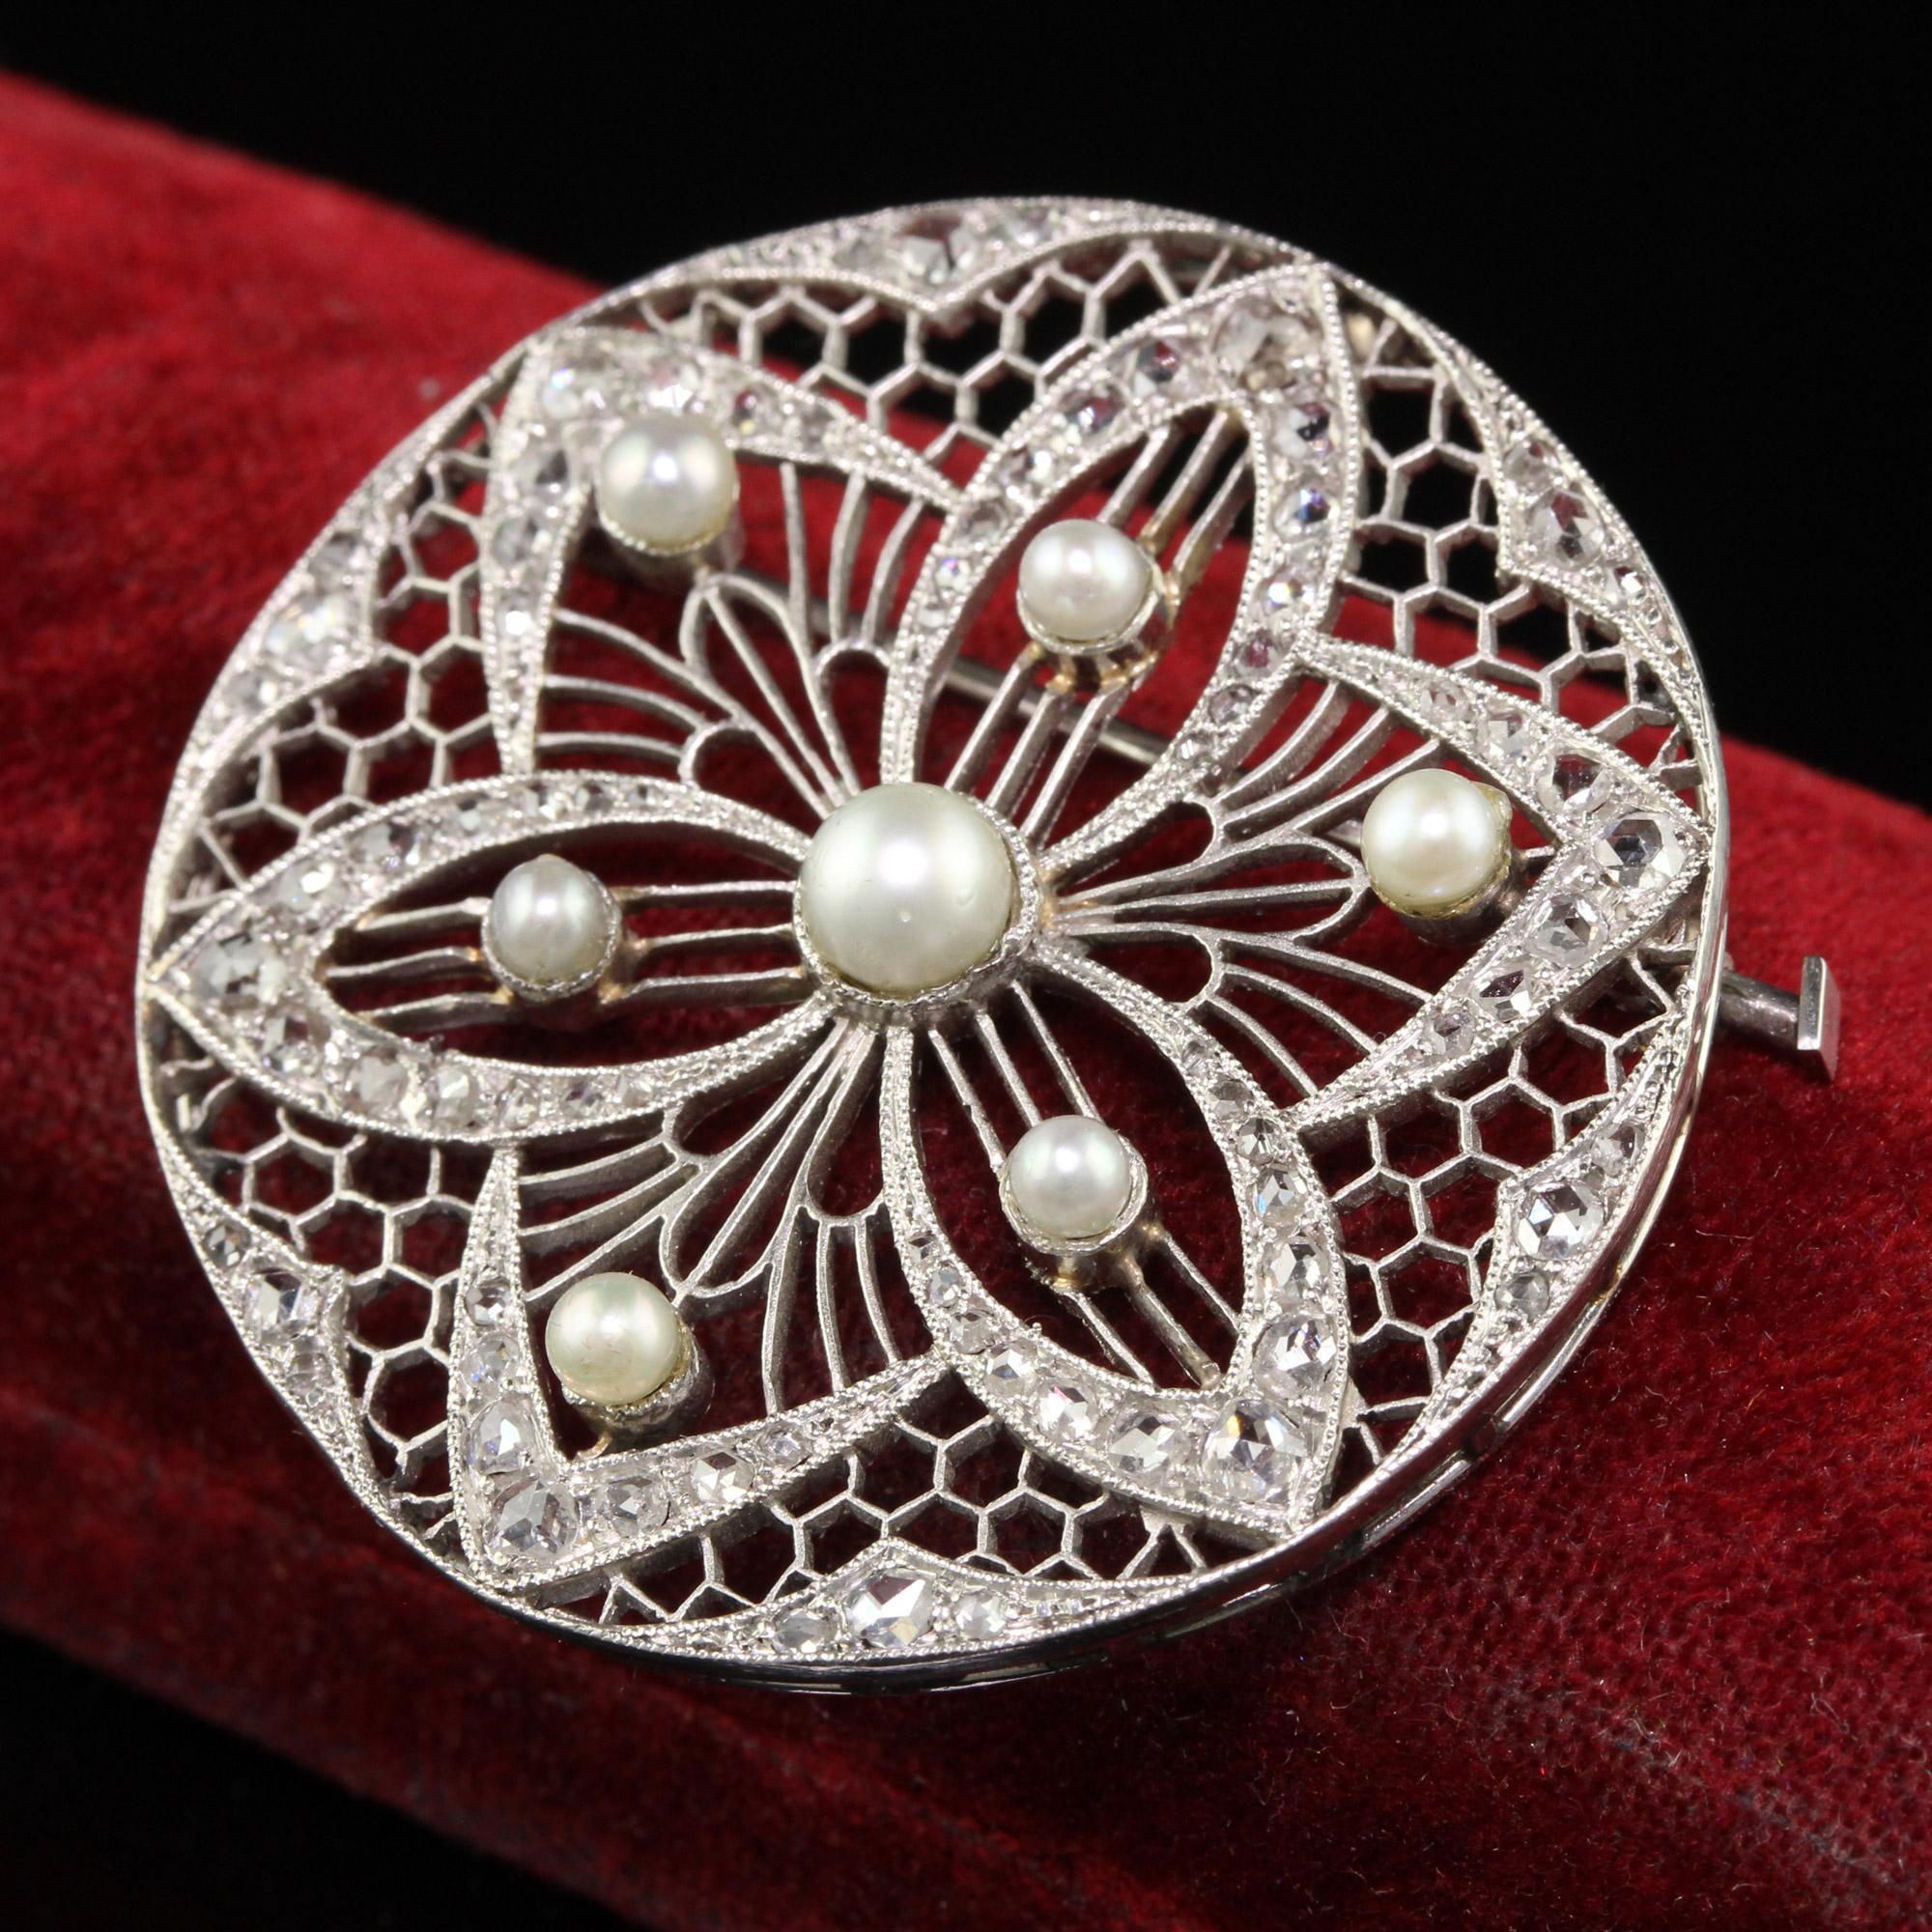 Antique Edwardian Platinum Diamond and Pearl Filigree Pin In Good Condition For Sale In Great Neck, NY